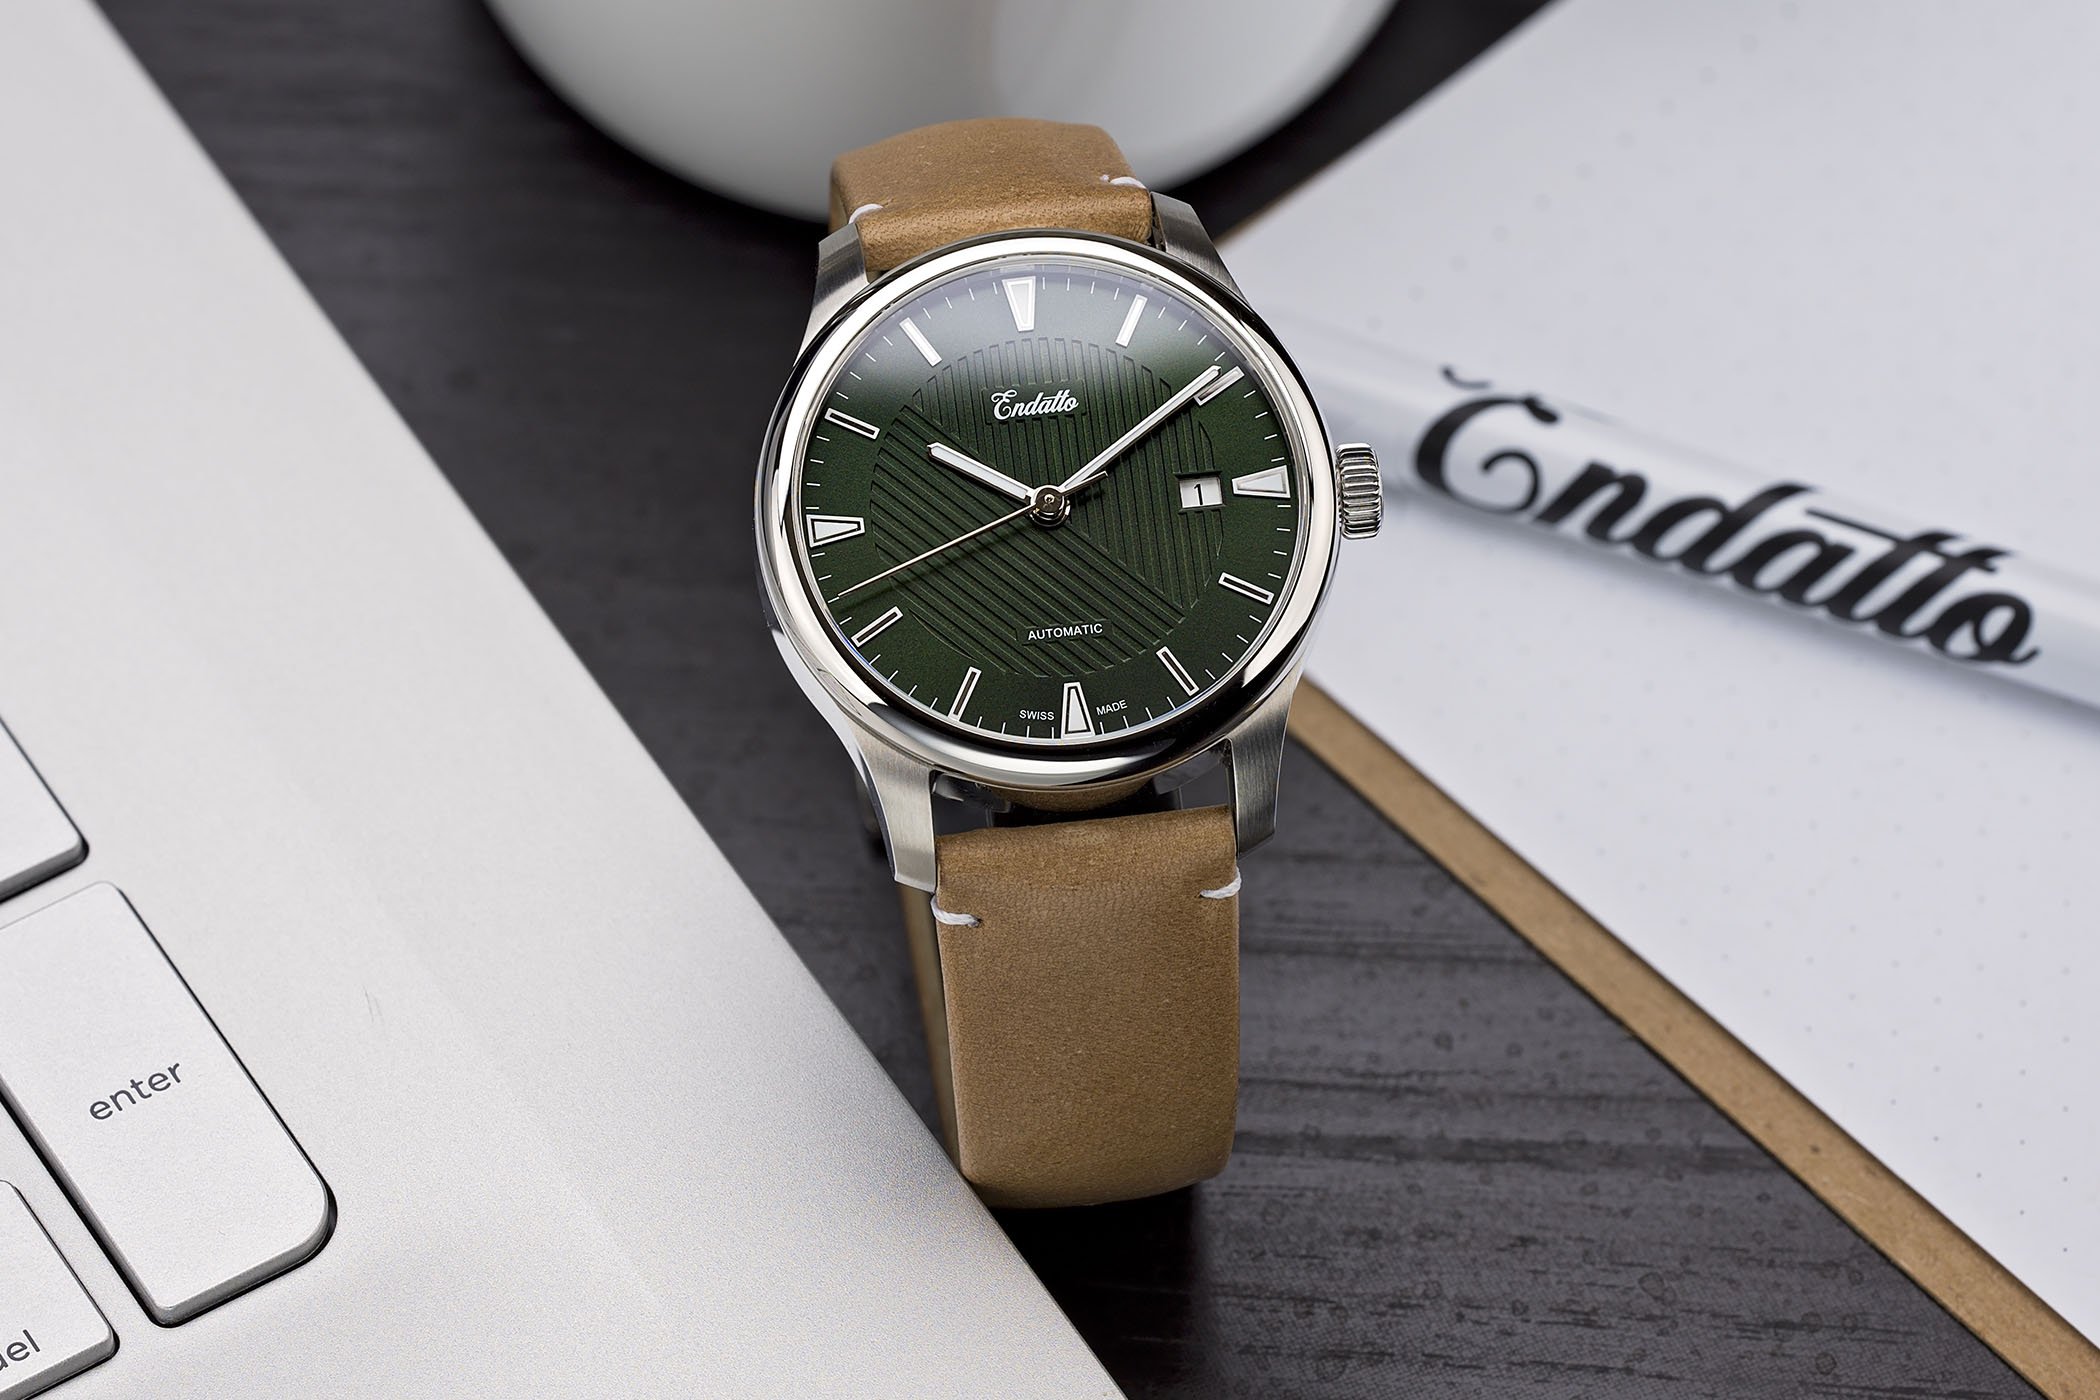 Endatto C1V1 and C1V2 - New American Watch Brand